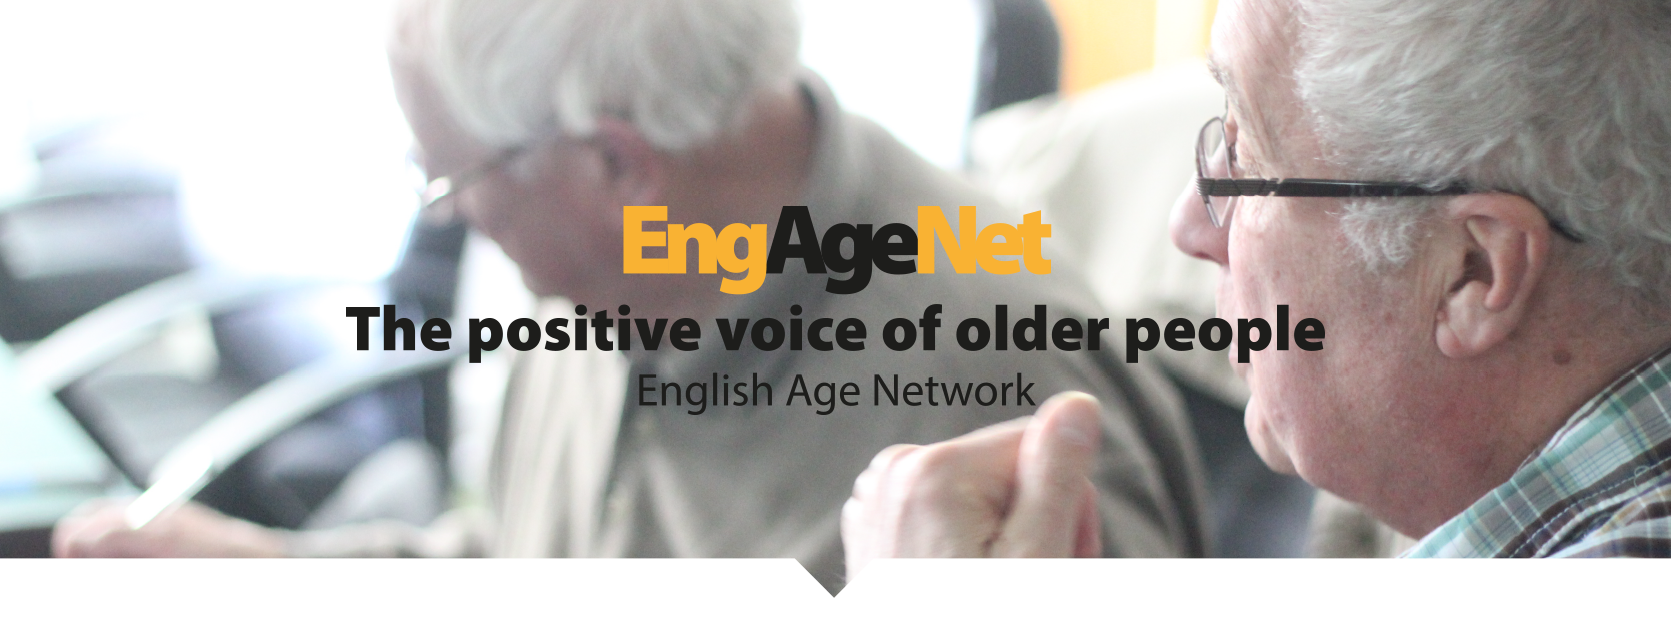 English Age Network - the positive voice of older people